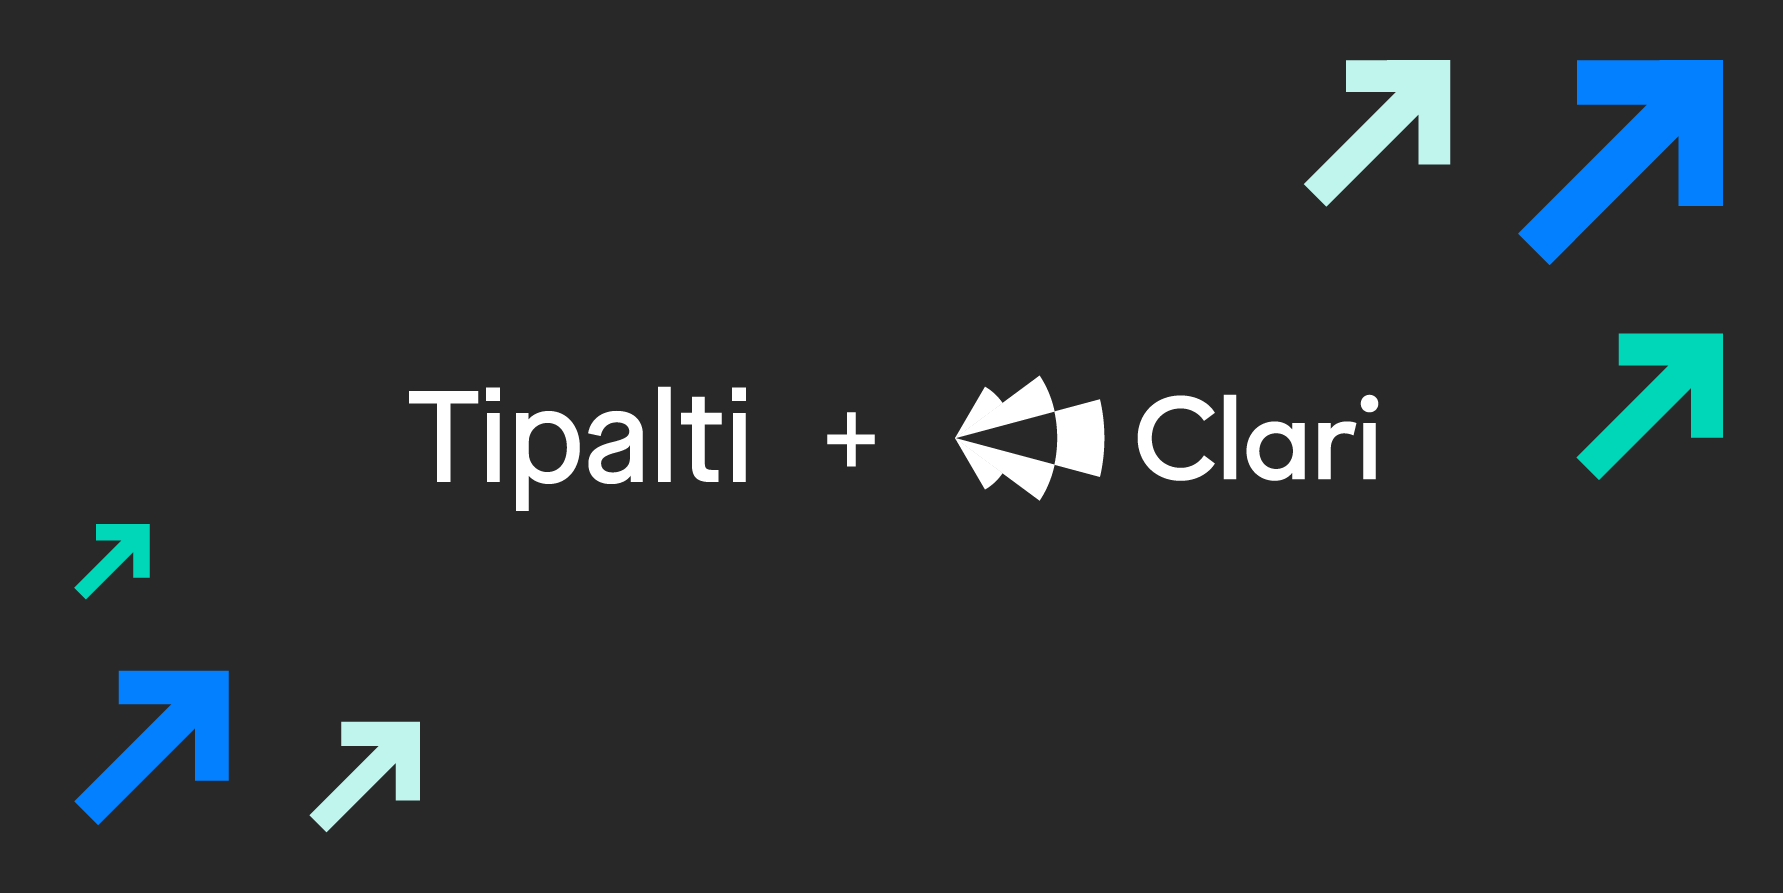 Banner image with the Tipalti and Clari logos